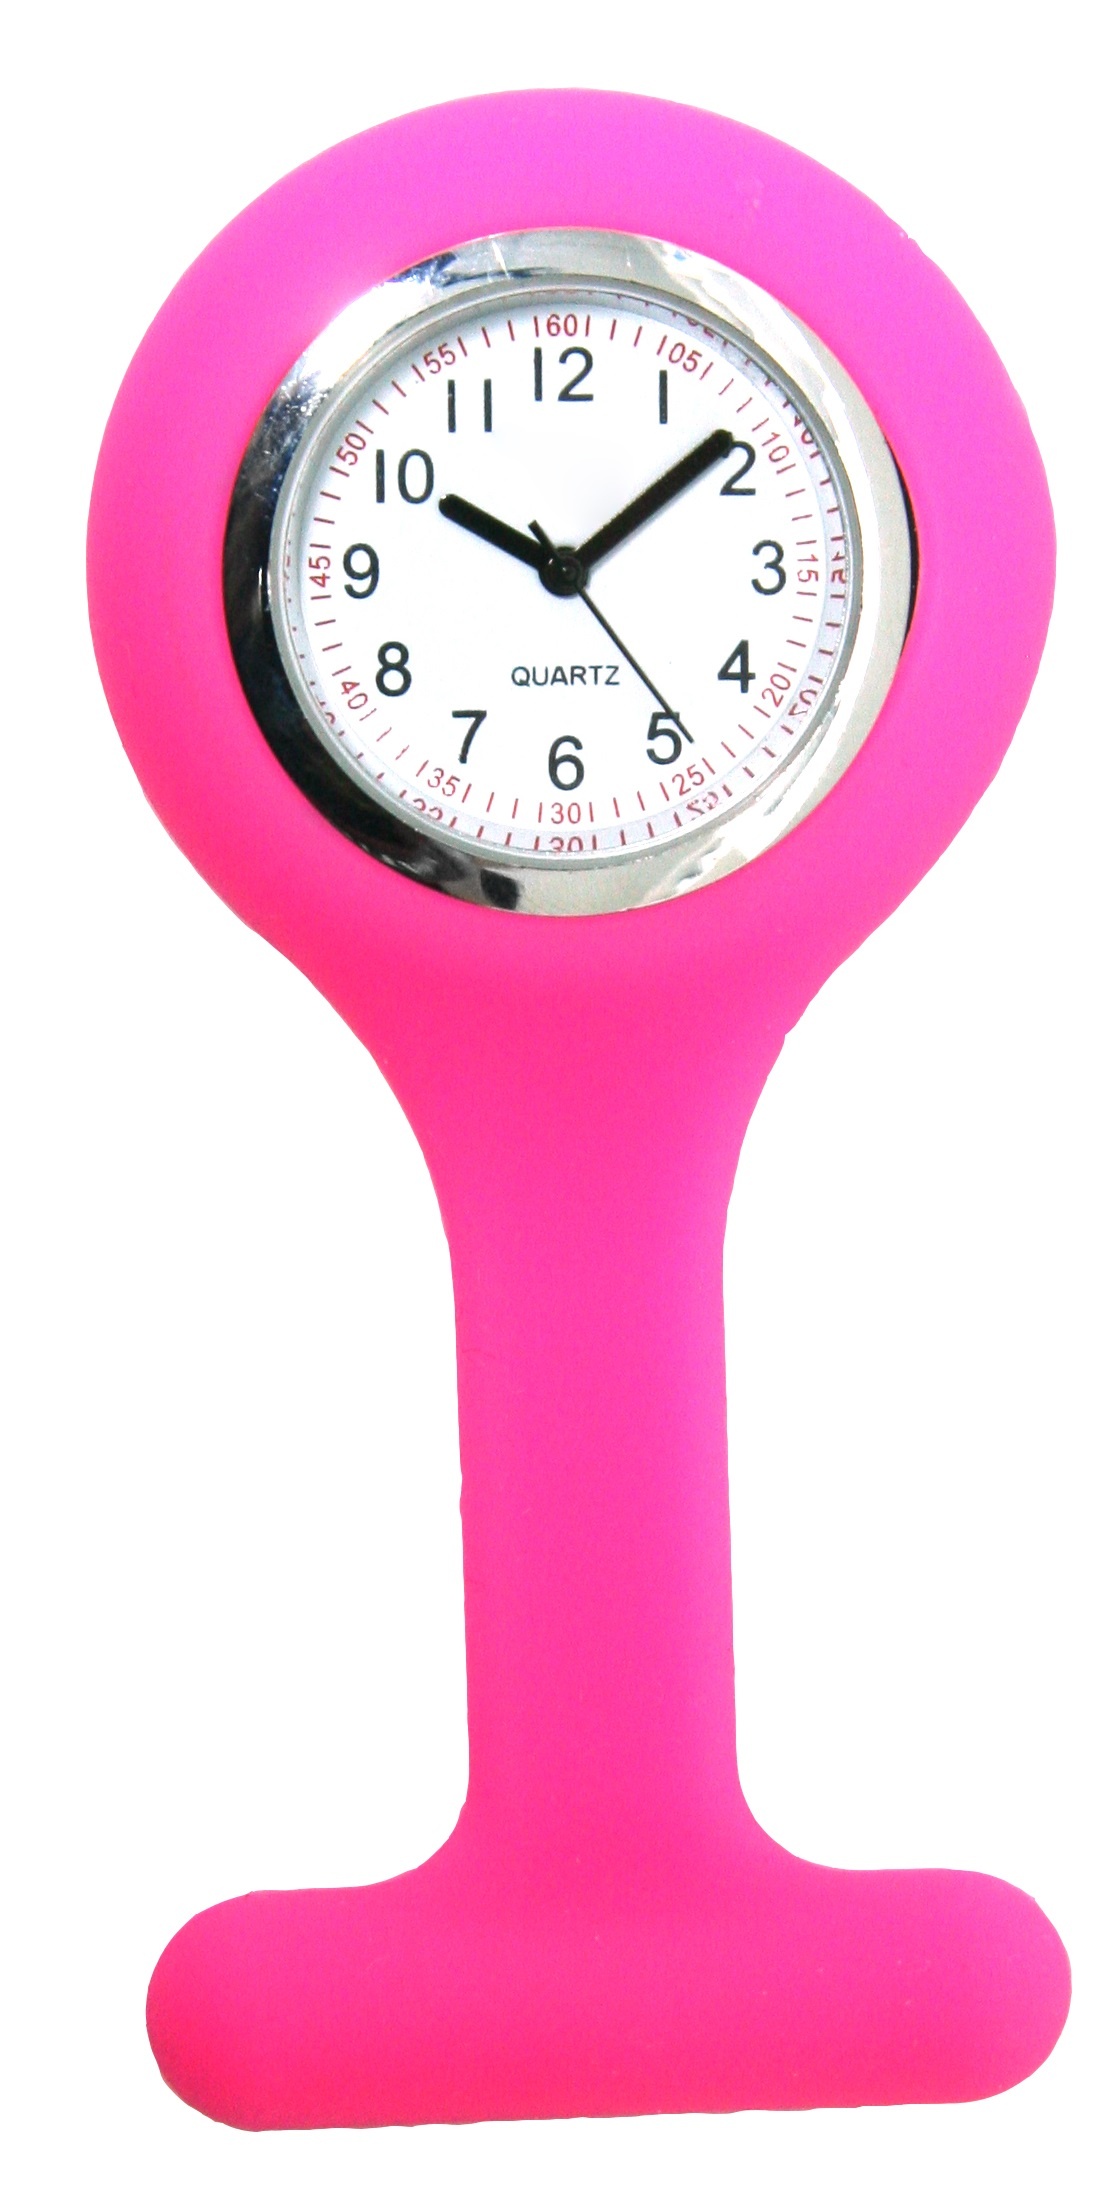 Liberty Nurses Fob Watch Silicone Pink image 0